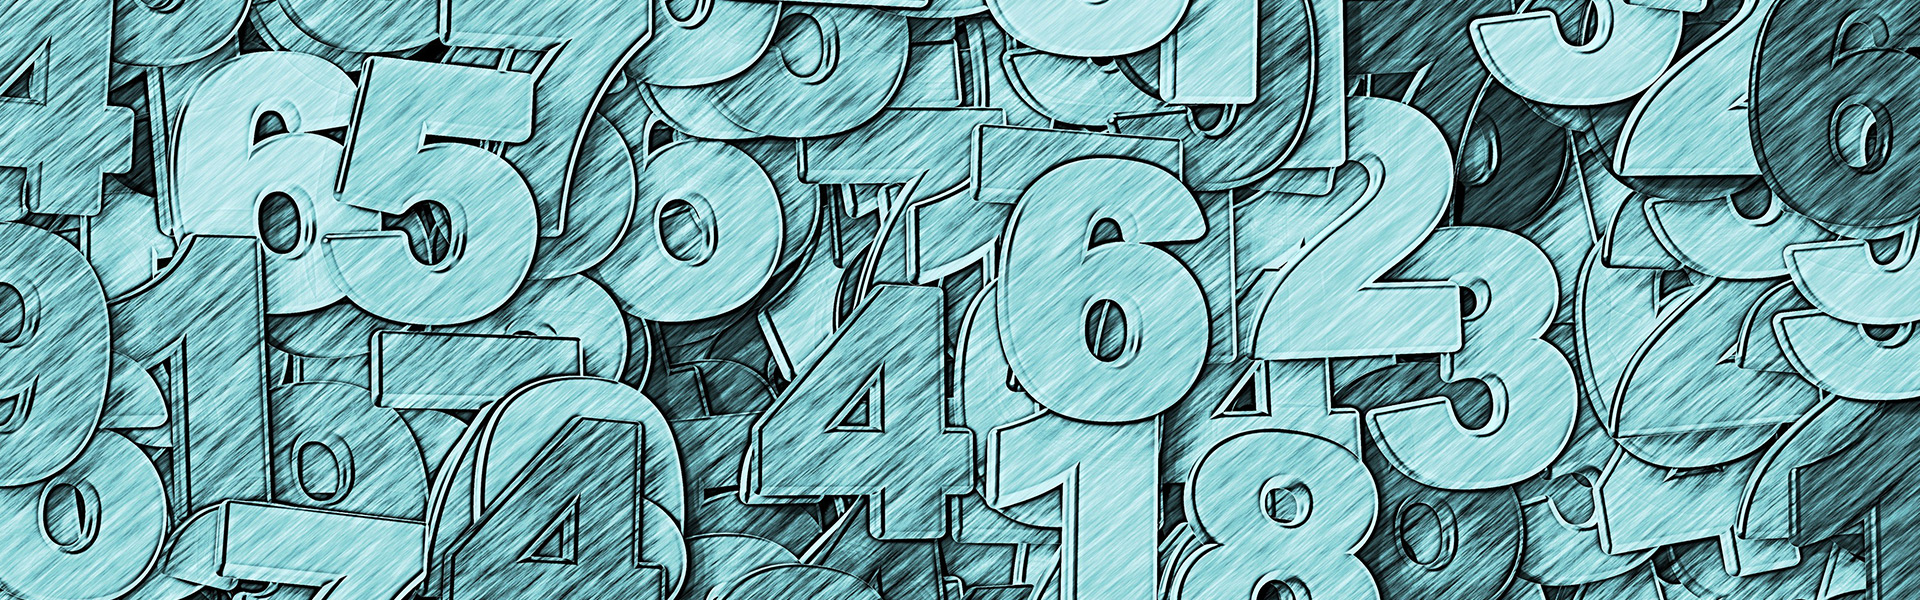 jumble of numbers in light blue with black outlines